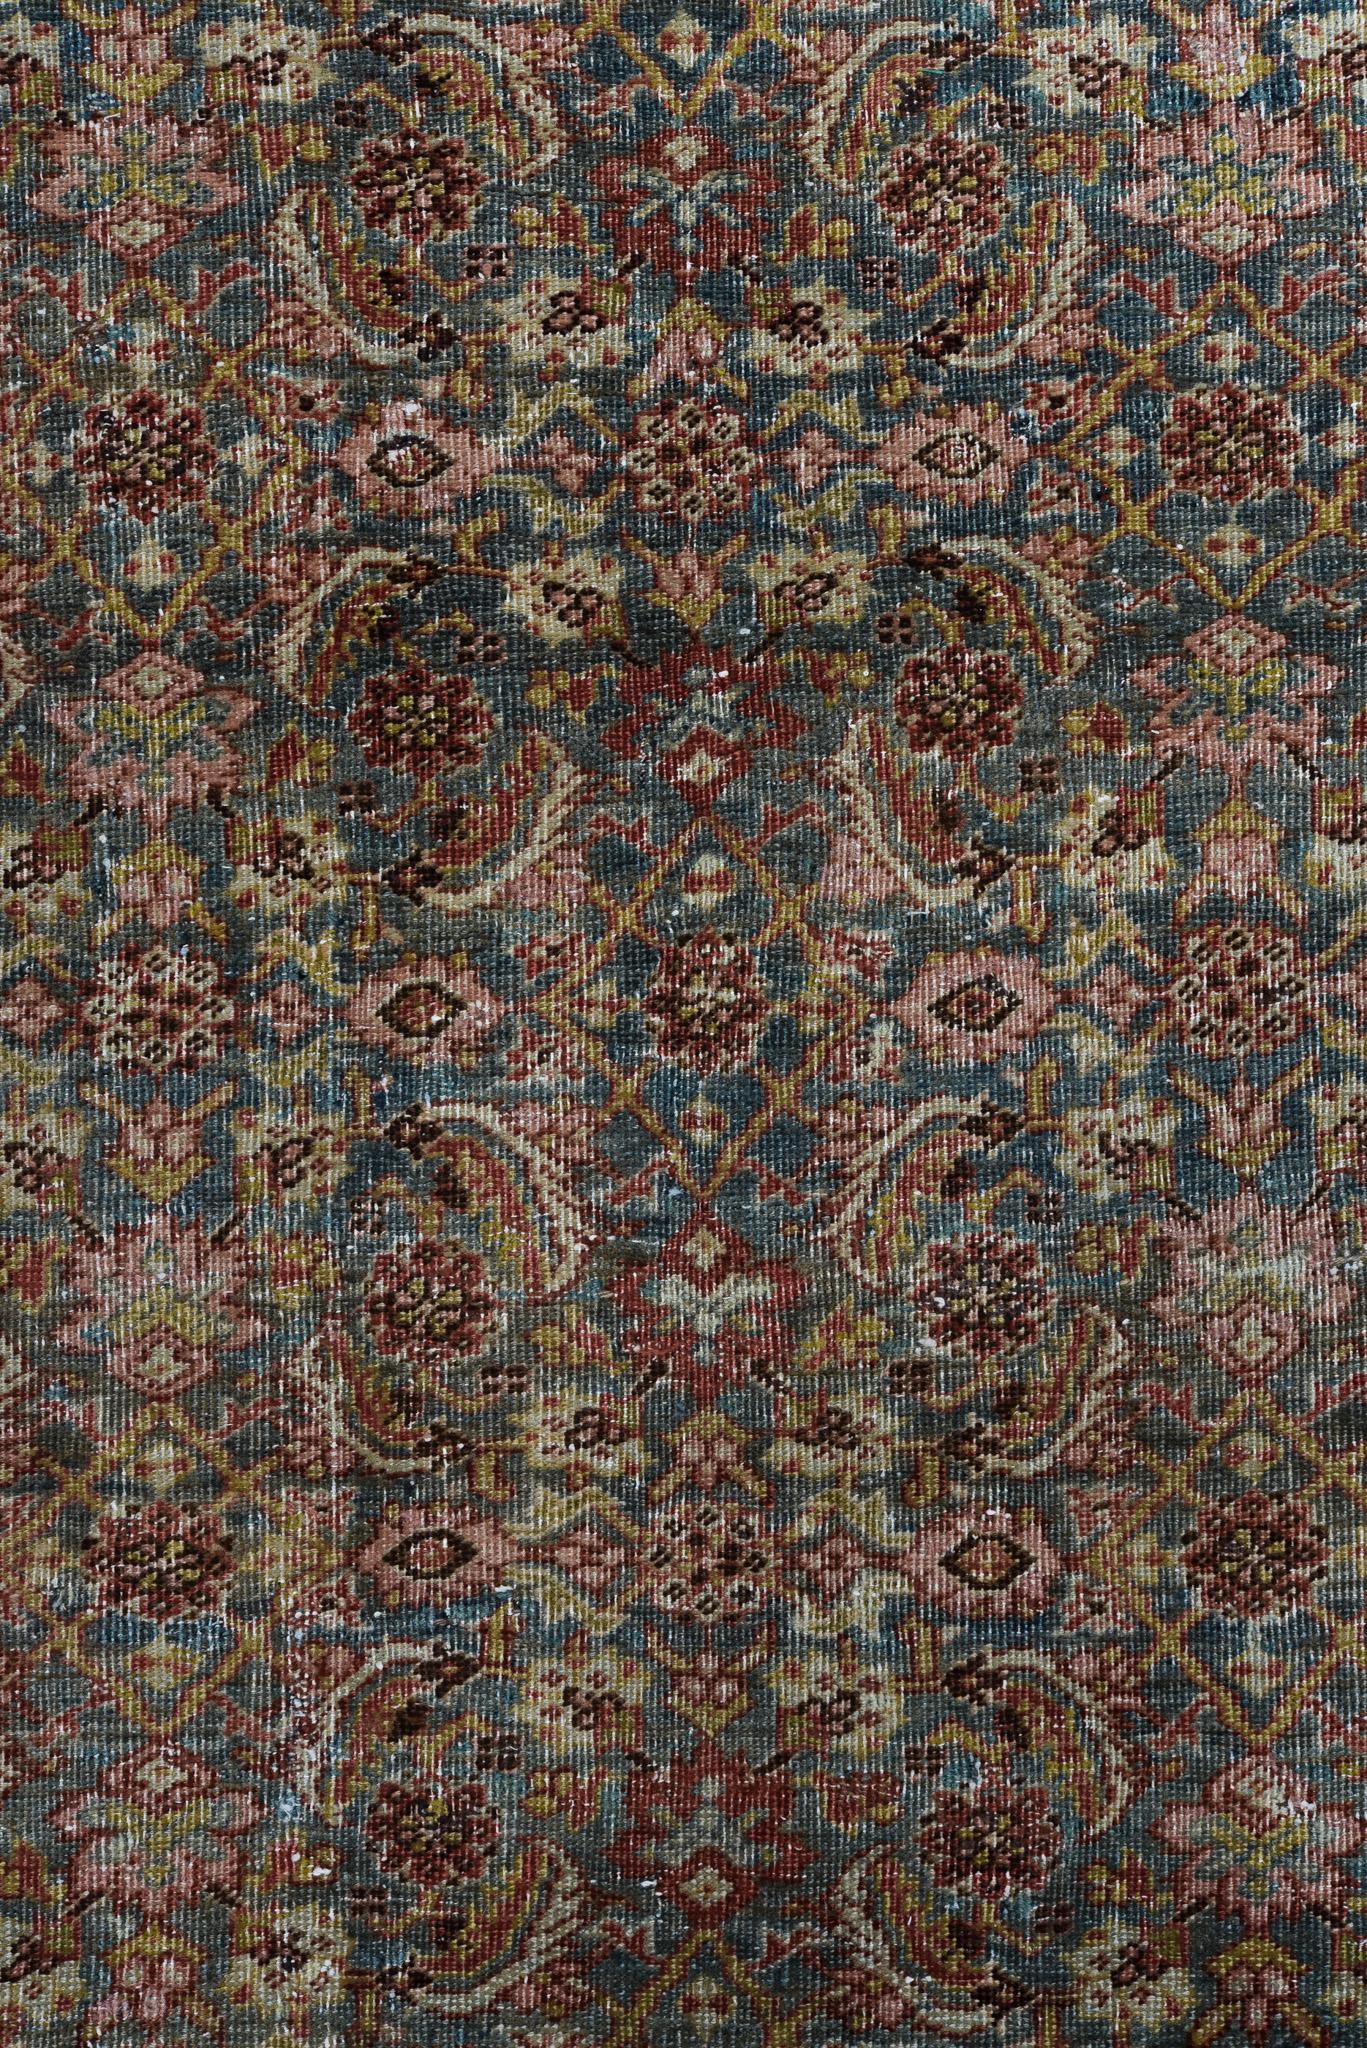 Hand-Knotted Eliko Rugs by David Ariel Colorful Antique Persian Bidjar Carpet, Herati FIeld For Sale